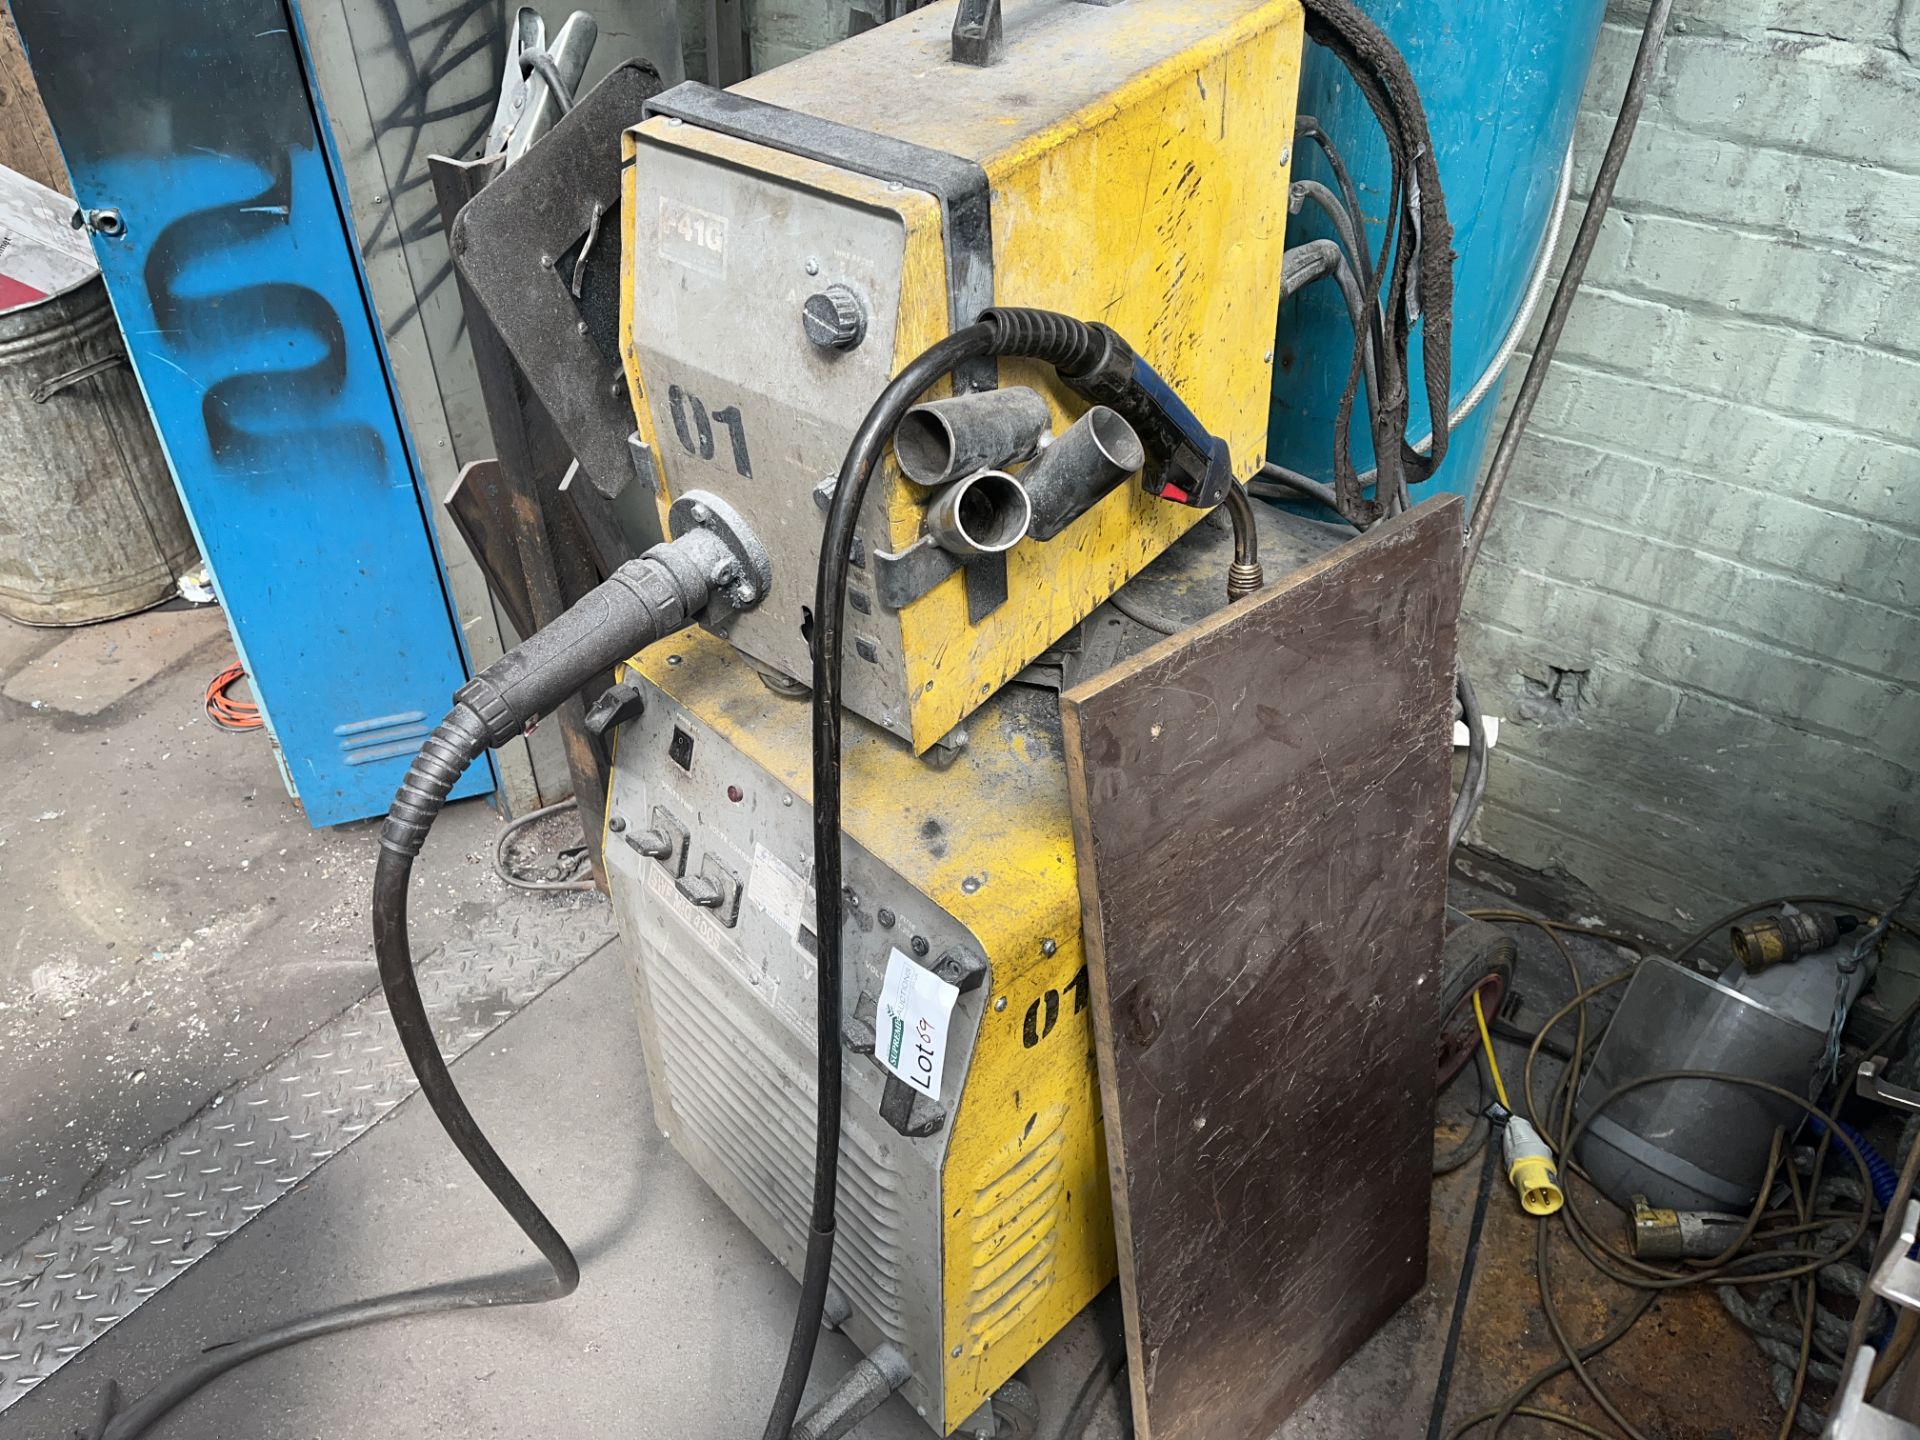 TEC ARC SWF MIC400S MIG WELDER WITH F41G ENCLOSED WIRE FEED UNIT (GAS NOT INCLUDED) - Image 2 of 2